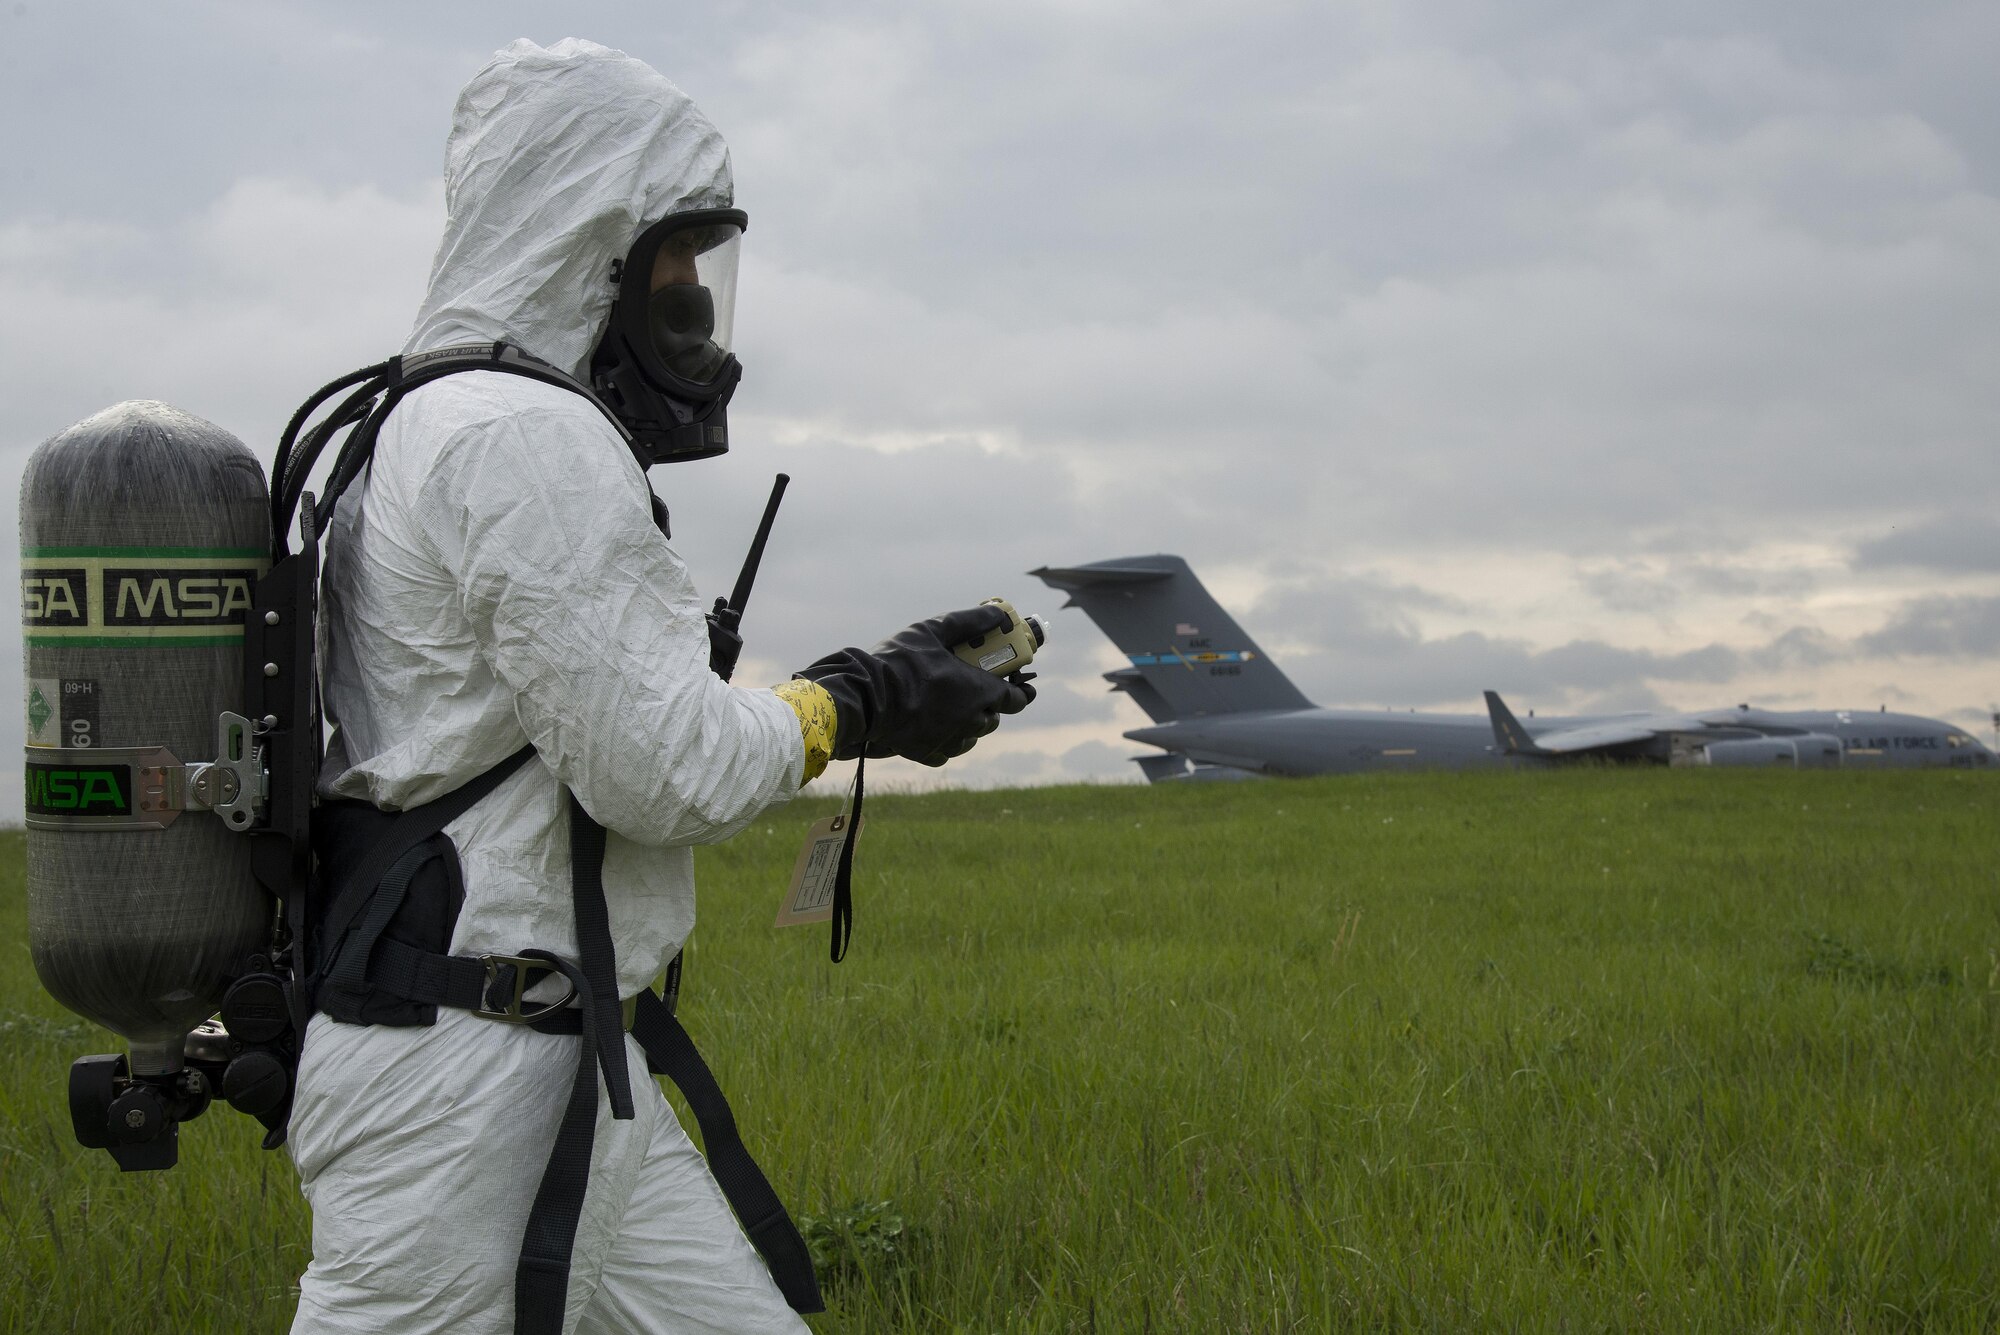 Senior Airman Jorge Rijo, 436th Aerospace Medicine Squadron bioenvironmental engineering technician, monitors air quality with a photoionization detector during a fuel spill exercise April 20, 2017, near a flightline drainage spill gate on Dover Air Force Base, Del. The detector measures airborne chemical and oxygen concentrations to determine the degree of air contamination in hazmat emergencies. (U.S. Air Force photo by Senior Airman Aaron J. Jenne)